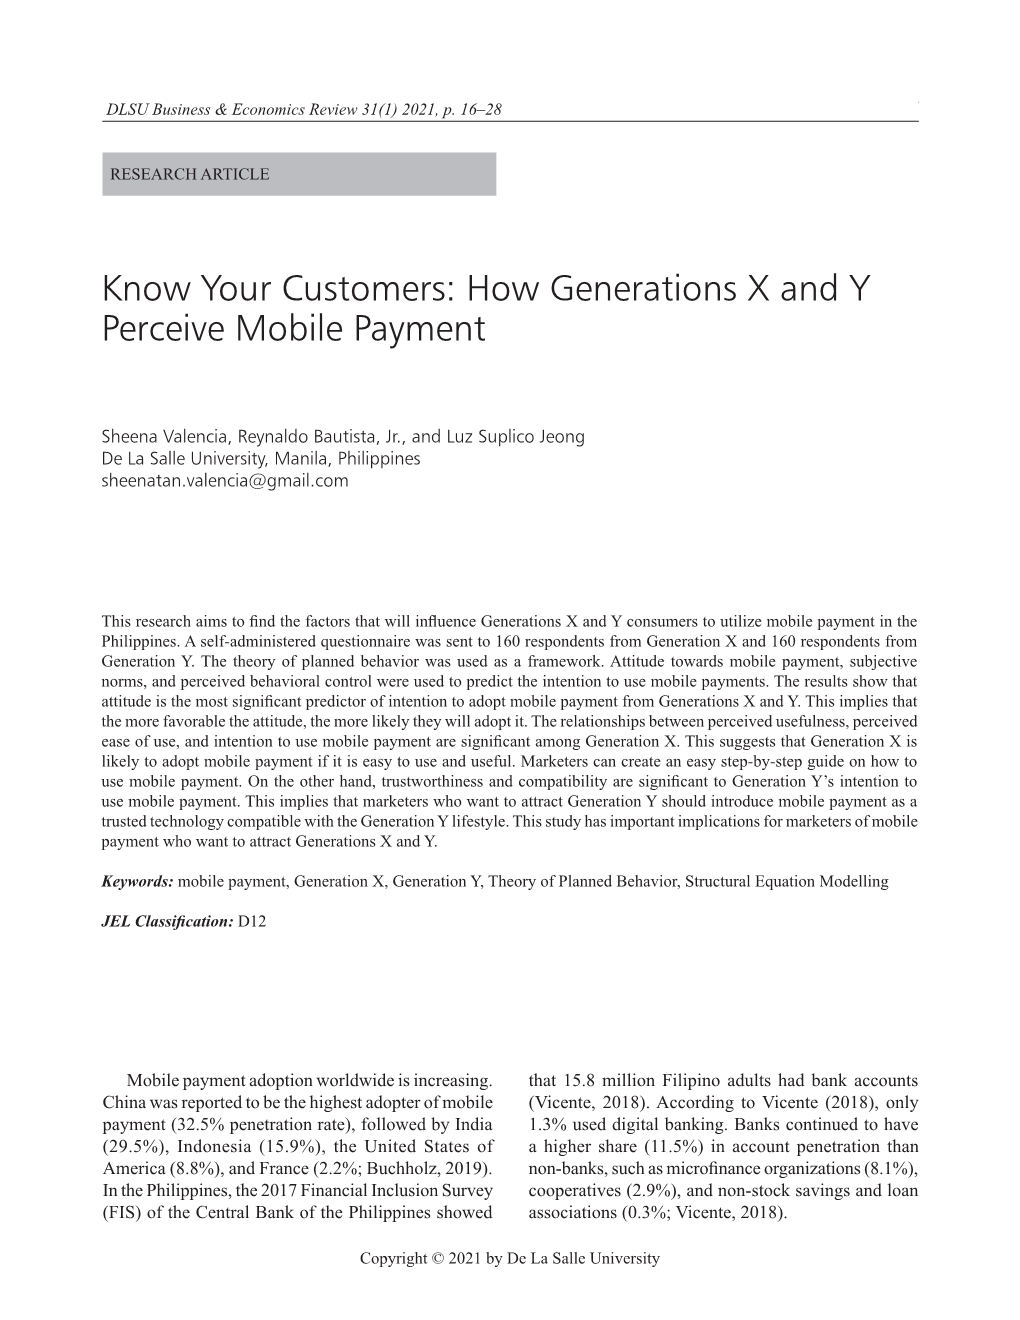 How Generations X and Y Perceive Mobile Payment